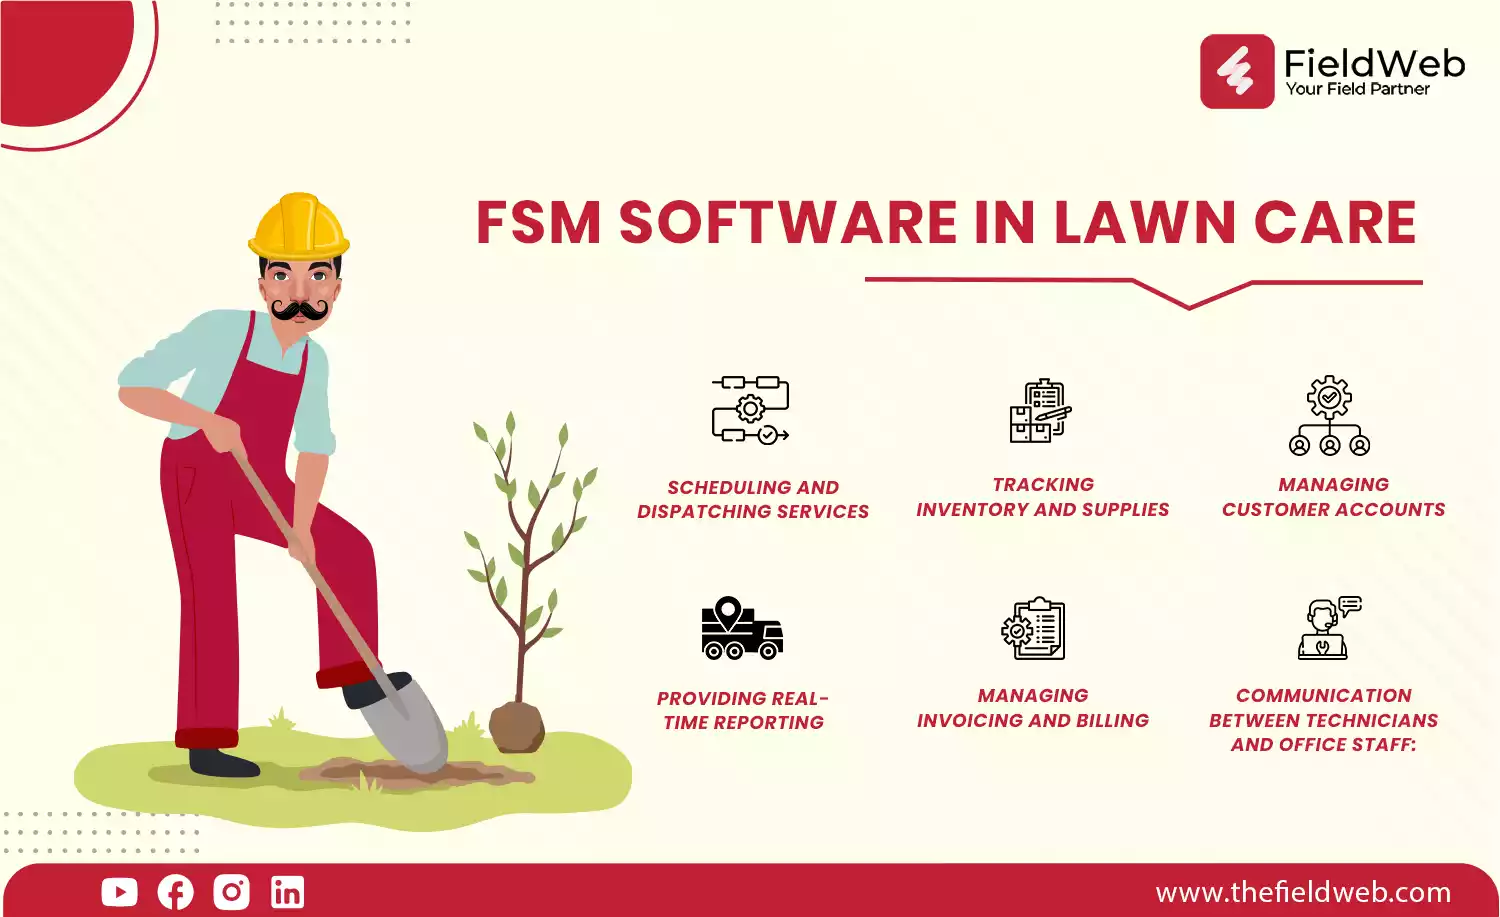 image is displaying use of fsm software in lawn care business